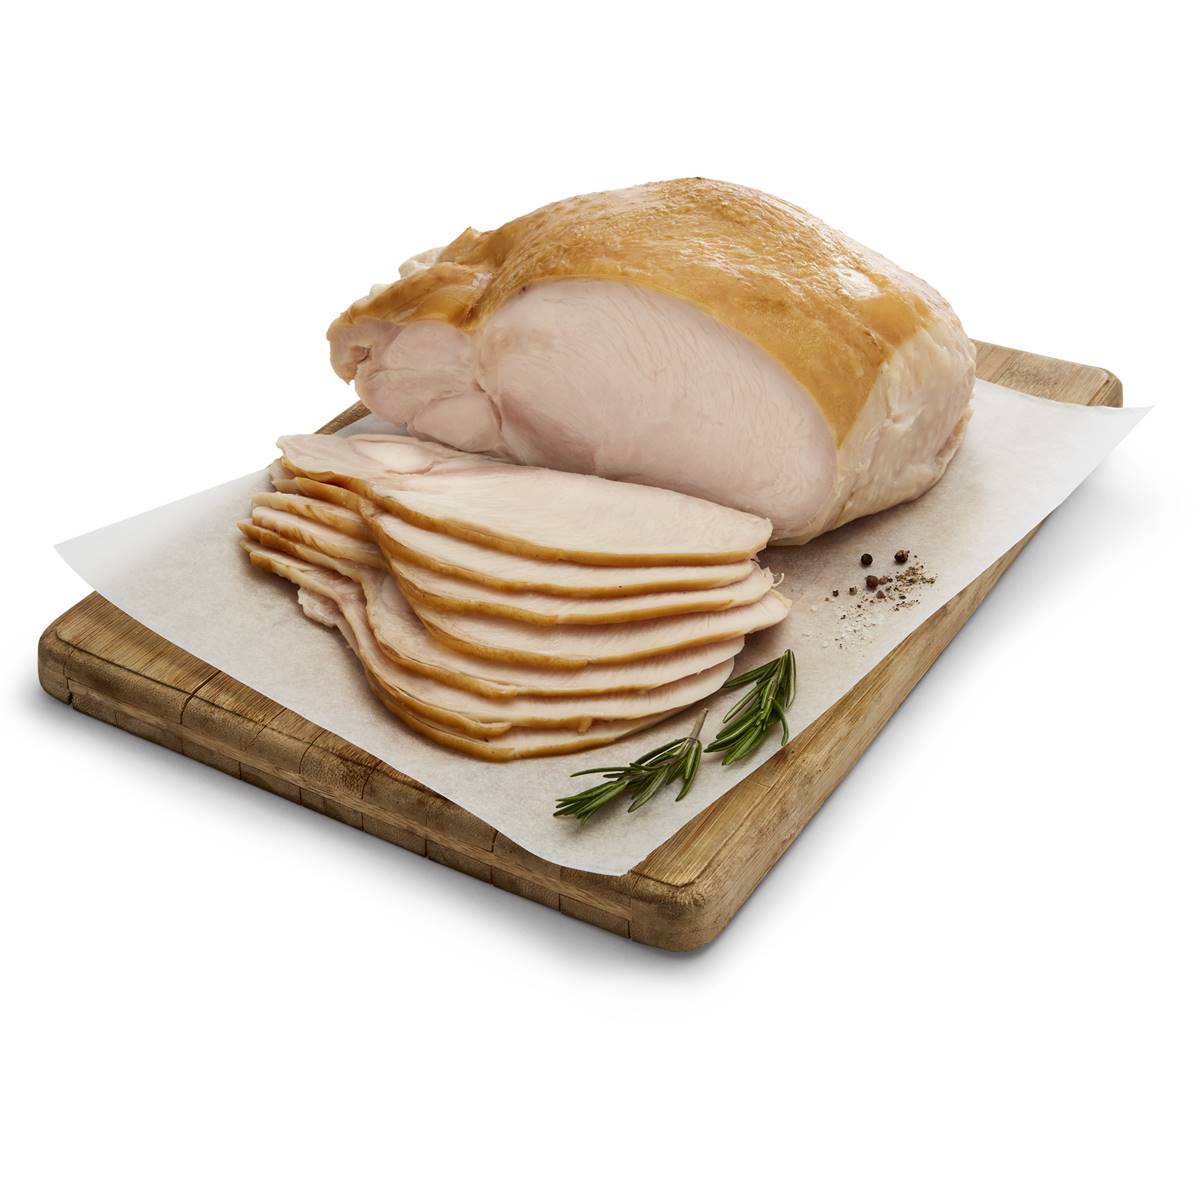 Calories in Ingham's Oven Roasted Turkey Breast Shaved From The Deli